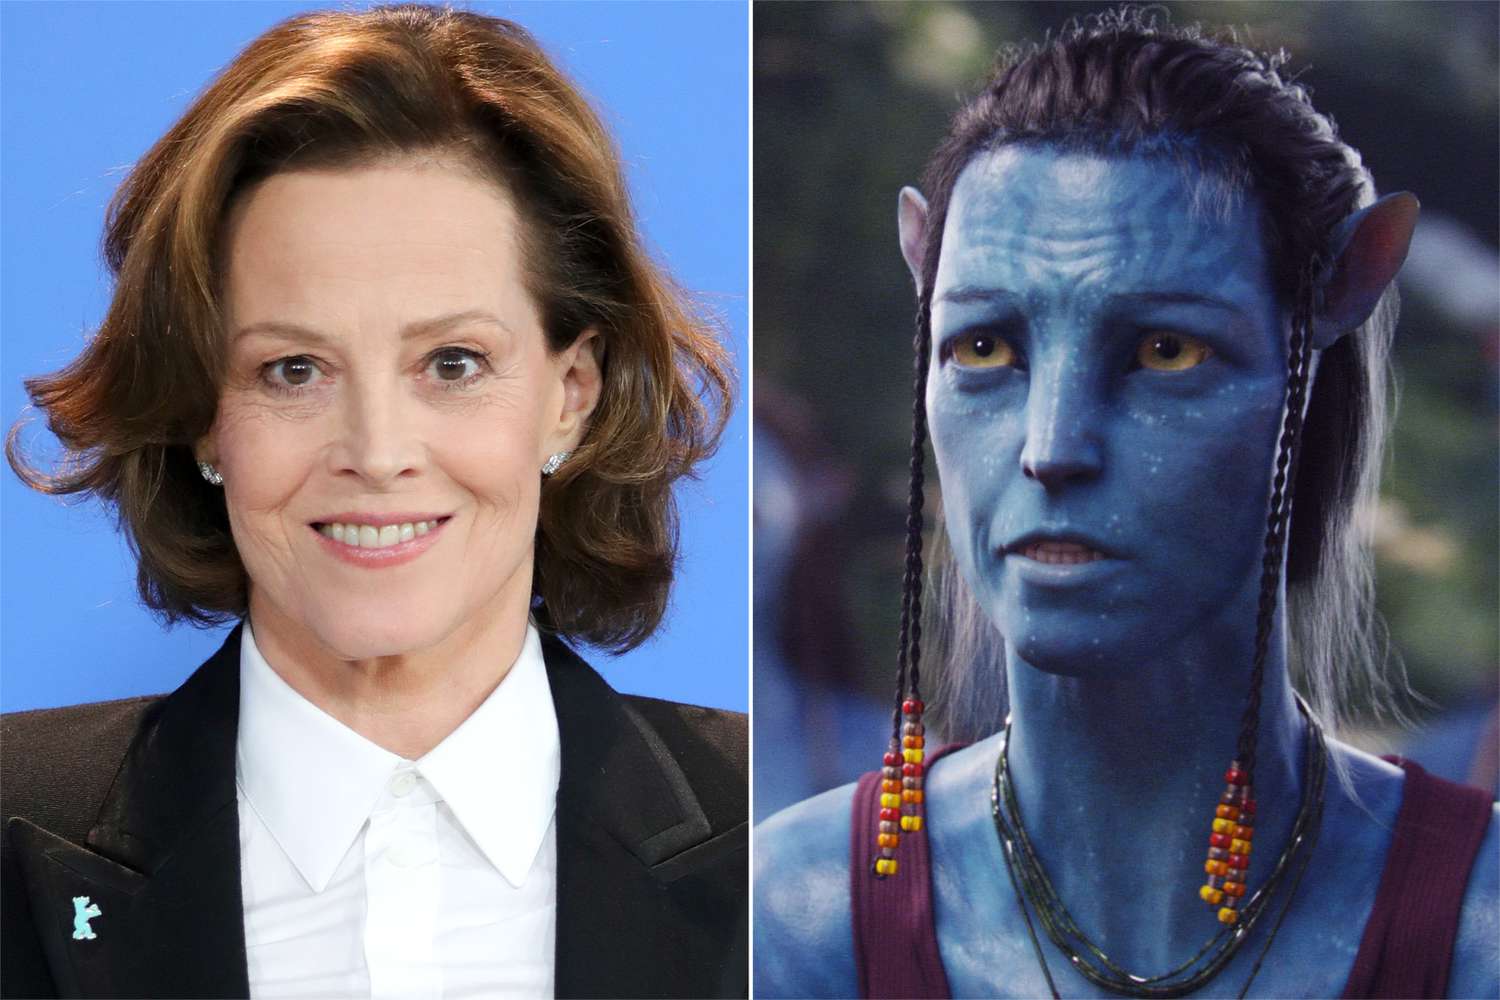 See Sigourney Weaver's new character in 'Avatar: The Way of Water'